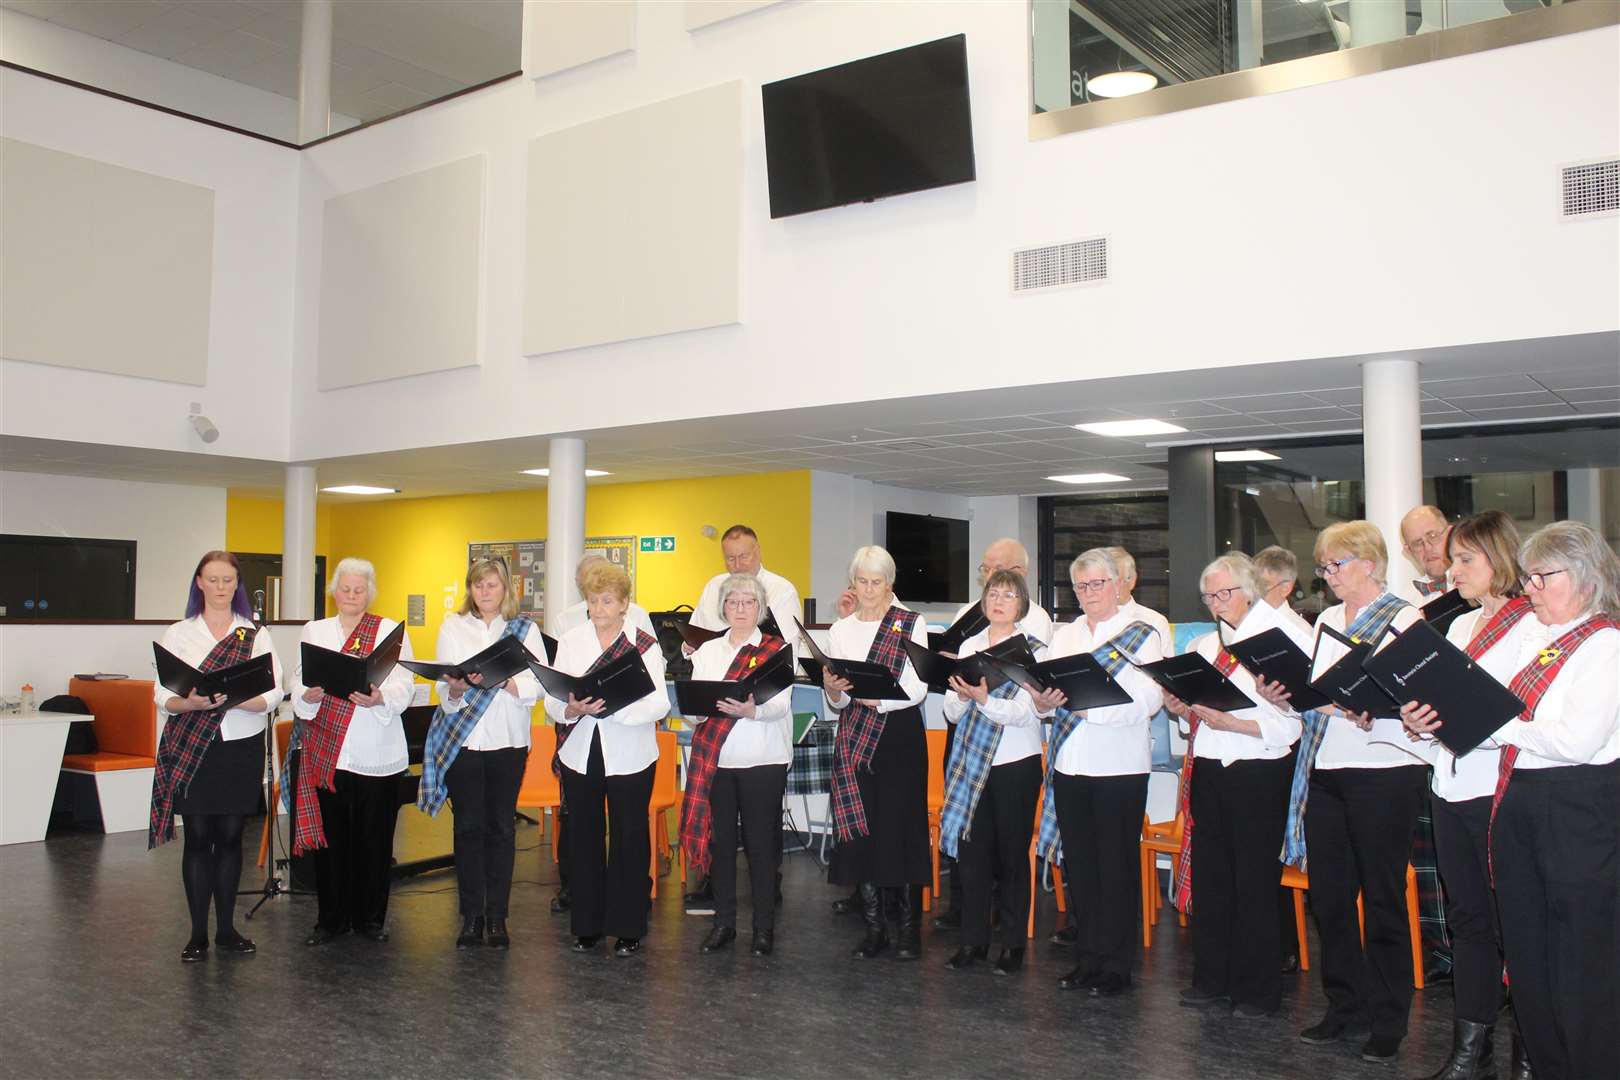 Inverurie choral society performing at Monday's Ukraine-Scotland social evening at Inverurie community campus